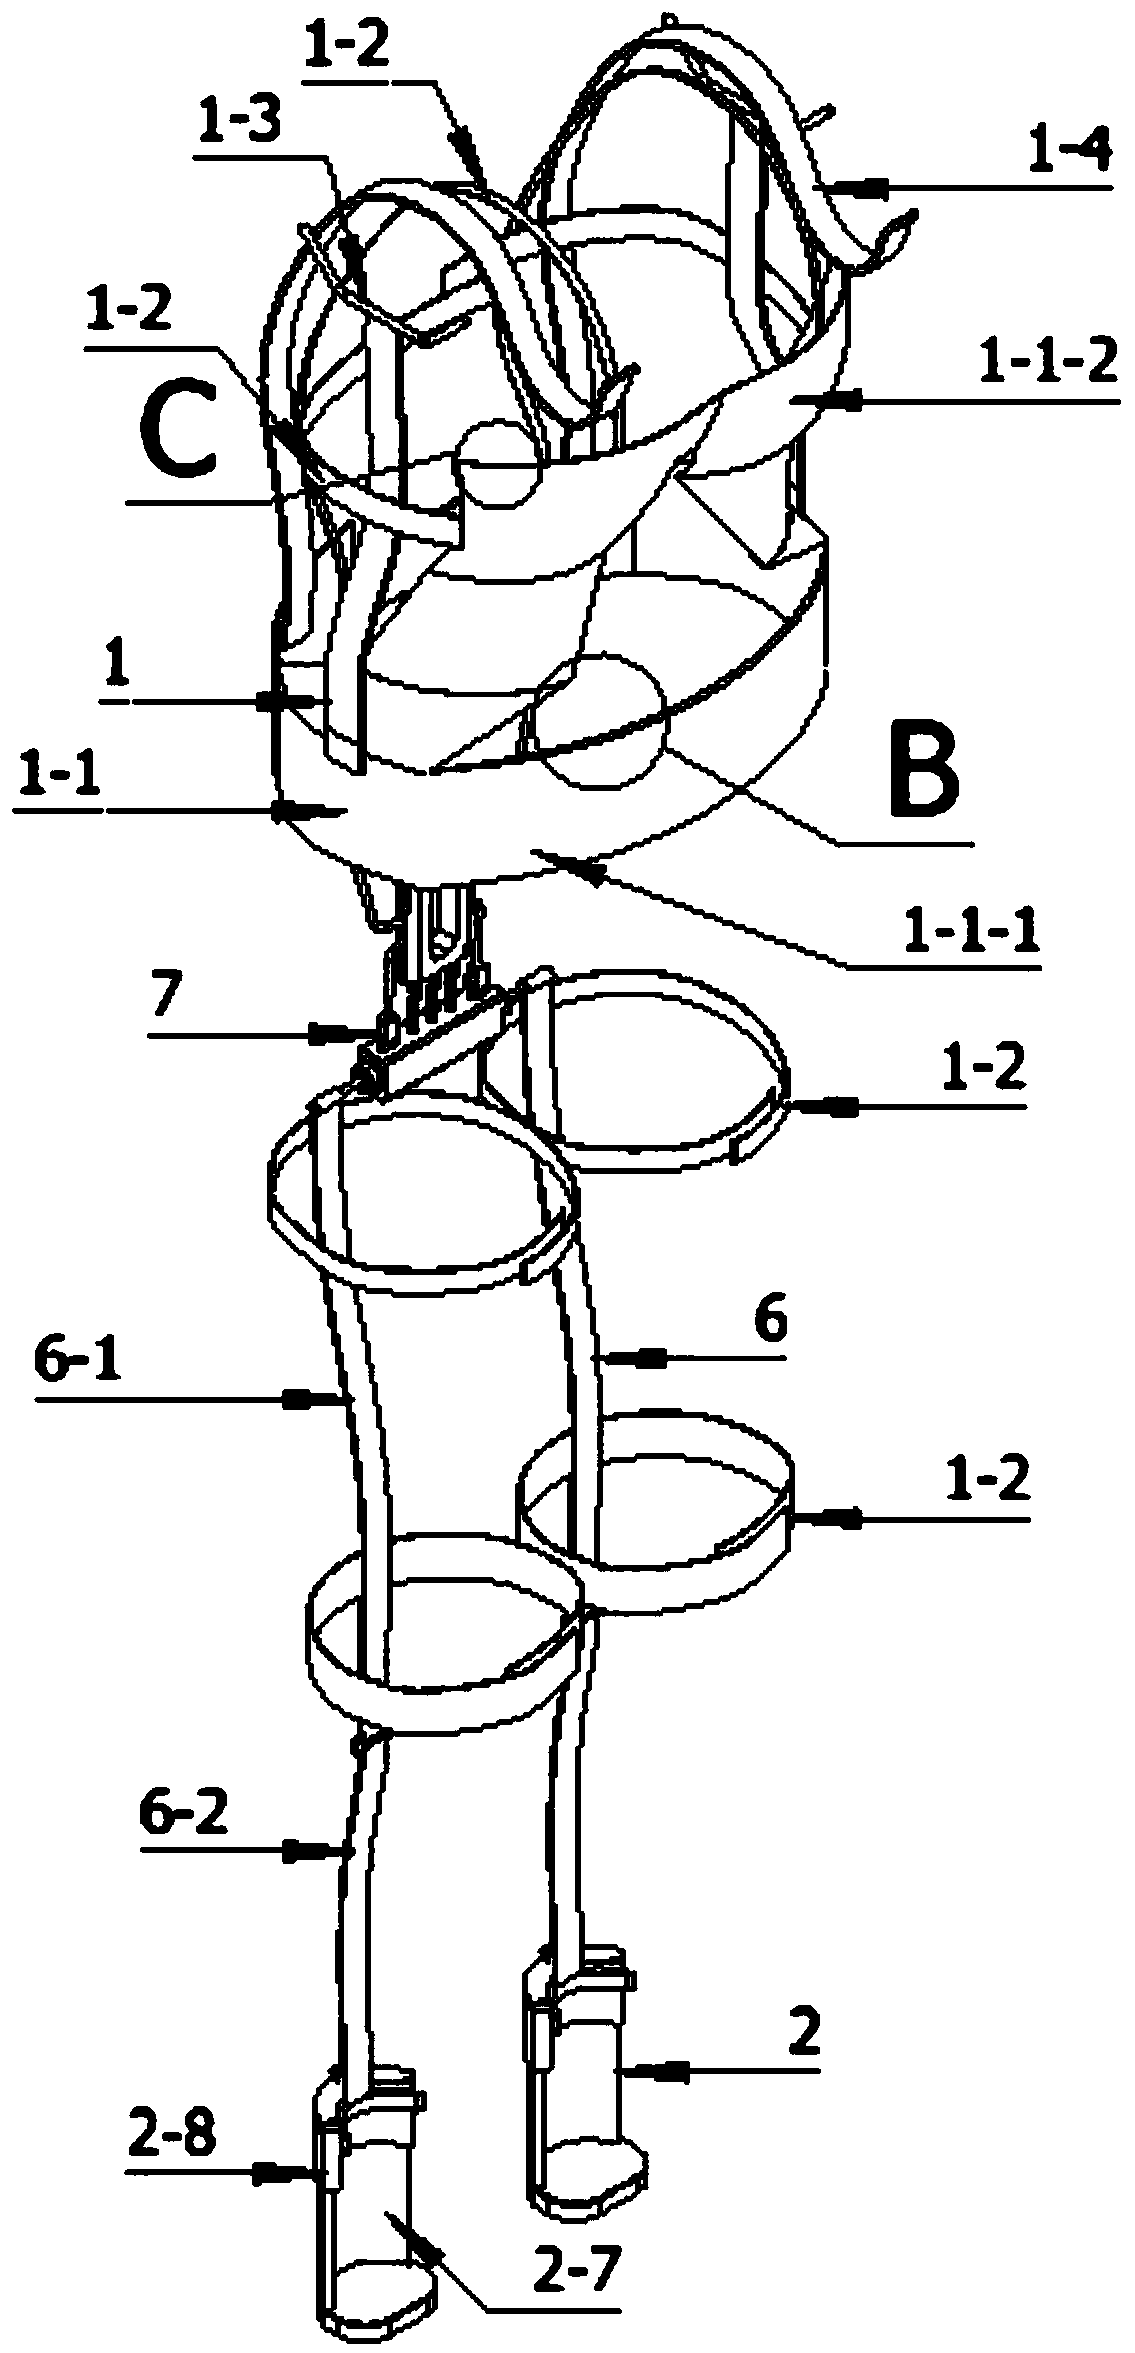 Support device acting on chest and abdomen